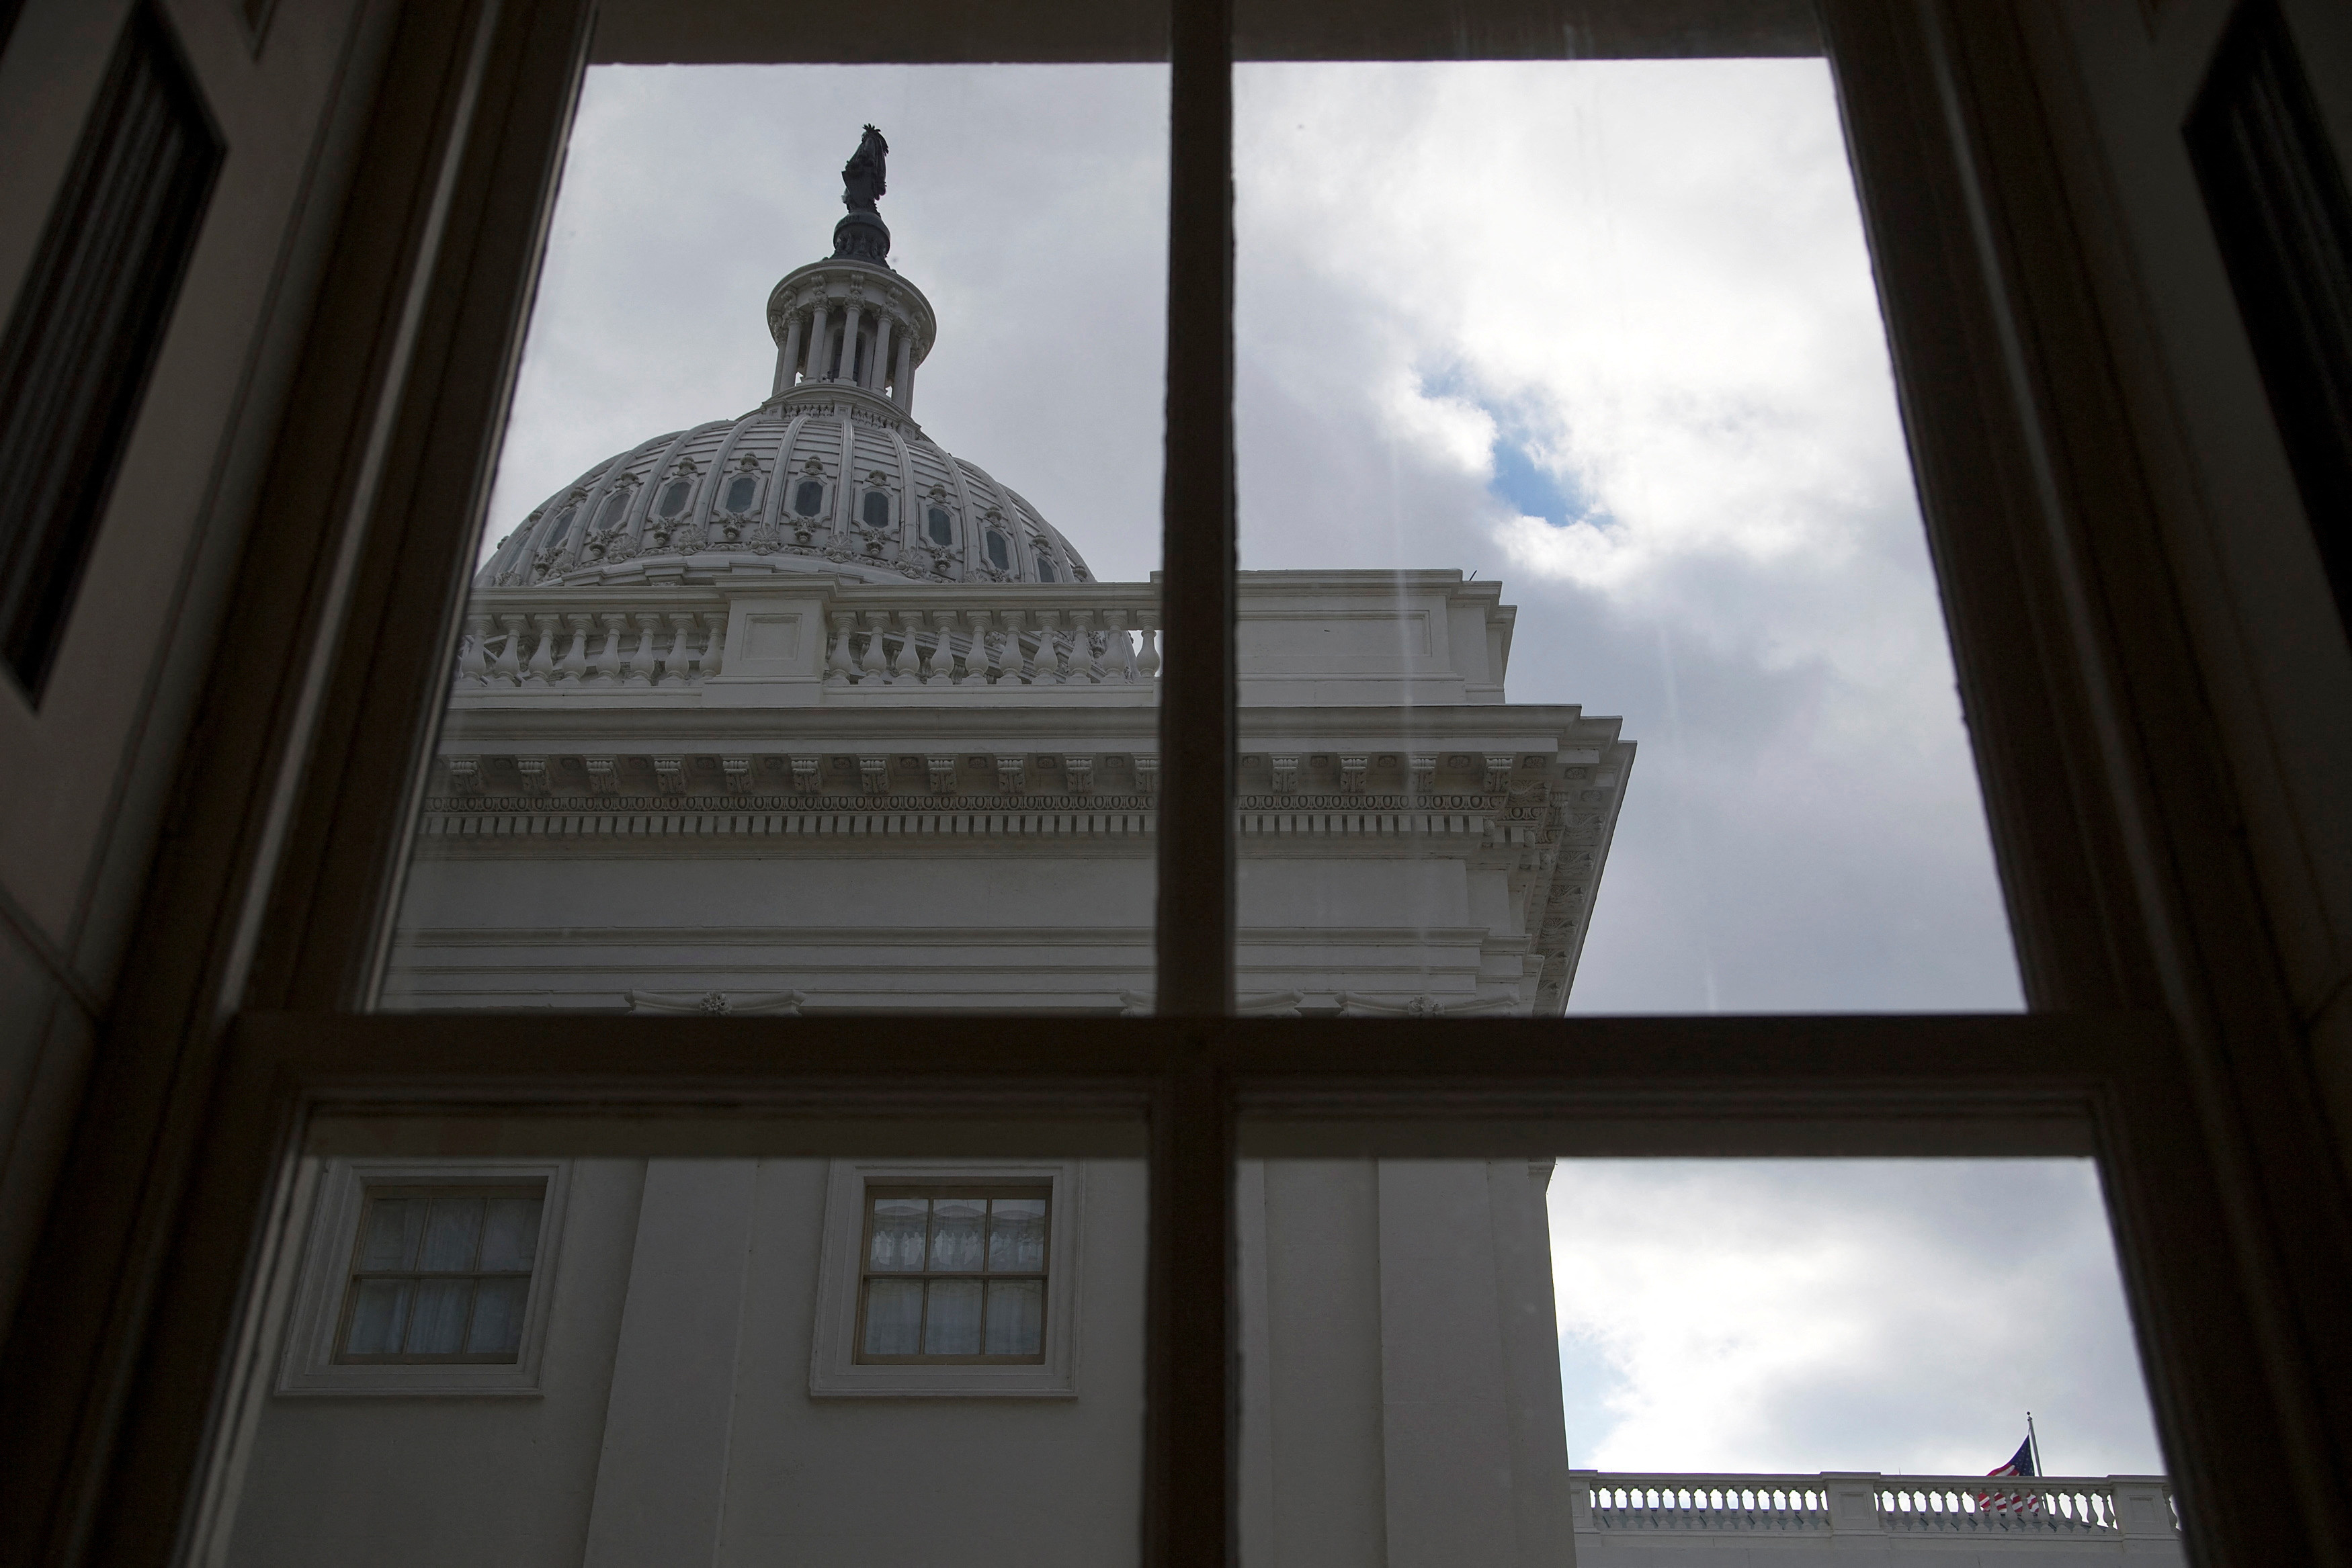 A general view of the U.S. Capitol dome as seen from a window outside the Senate chamber in Washington